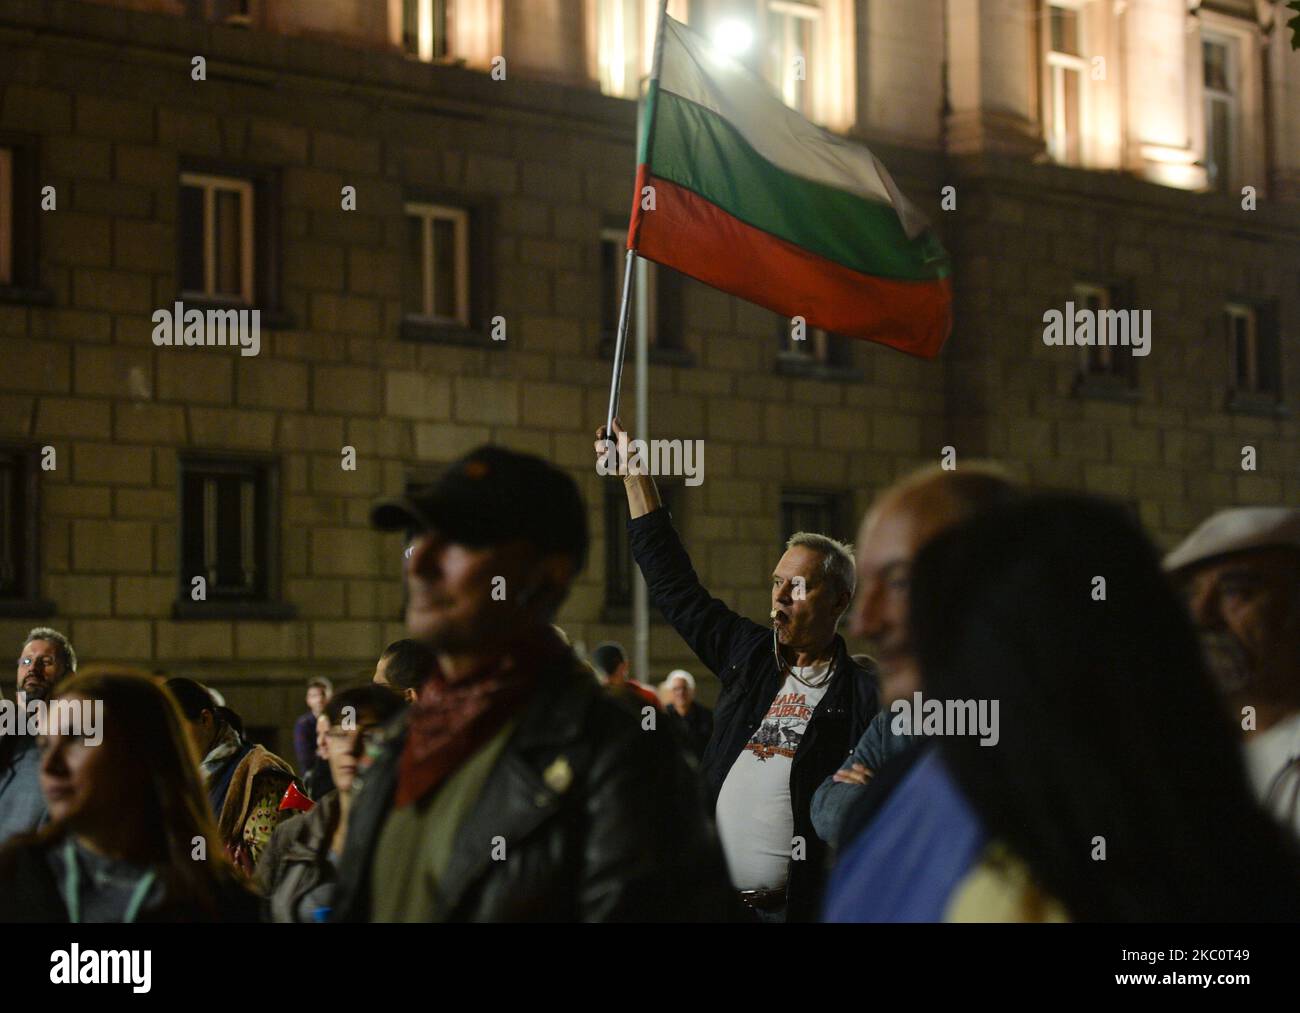 A protester waves a Bulgarian national flag and blow whistle on the 82nd day of anti-government protest in Sofia, in the Triangle of Power (the space between the buildings of the Presidency, the National Assembly and the Council of Ministers). For nearly three months people have been taking part in daily protests against corruption, demanding the resignation of the government of Boyko Borissov, in power since 2009. On Monday, September 28, 2020, in Sofia, Bulgaria. (Photo by Artur Widak/NurPhoto) Stock Photo